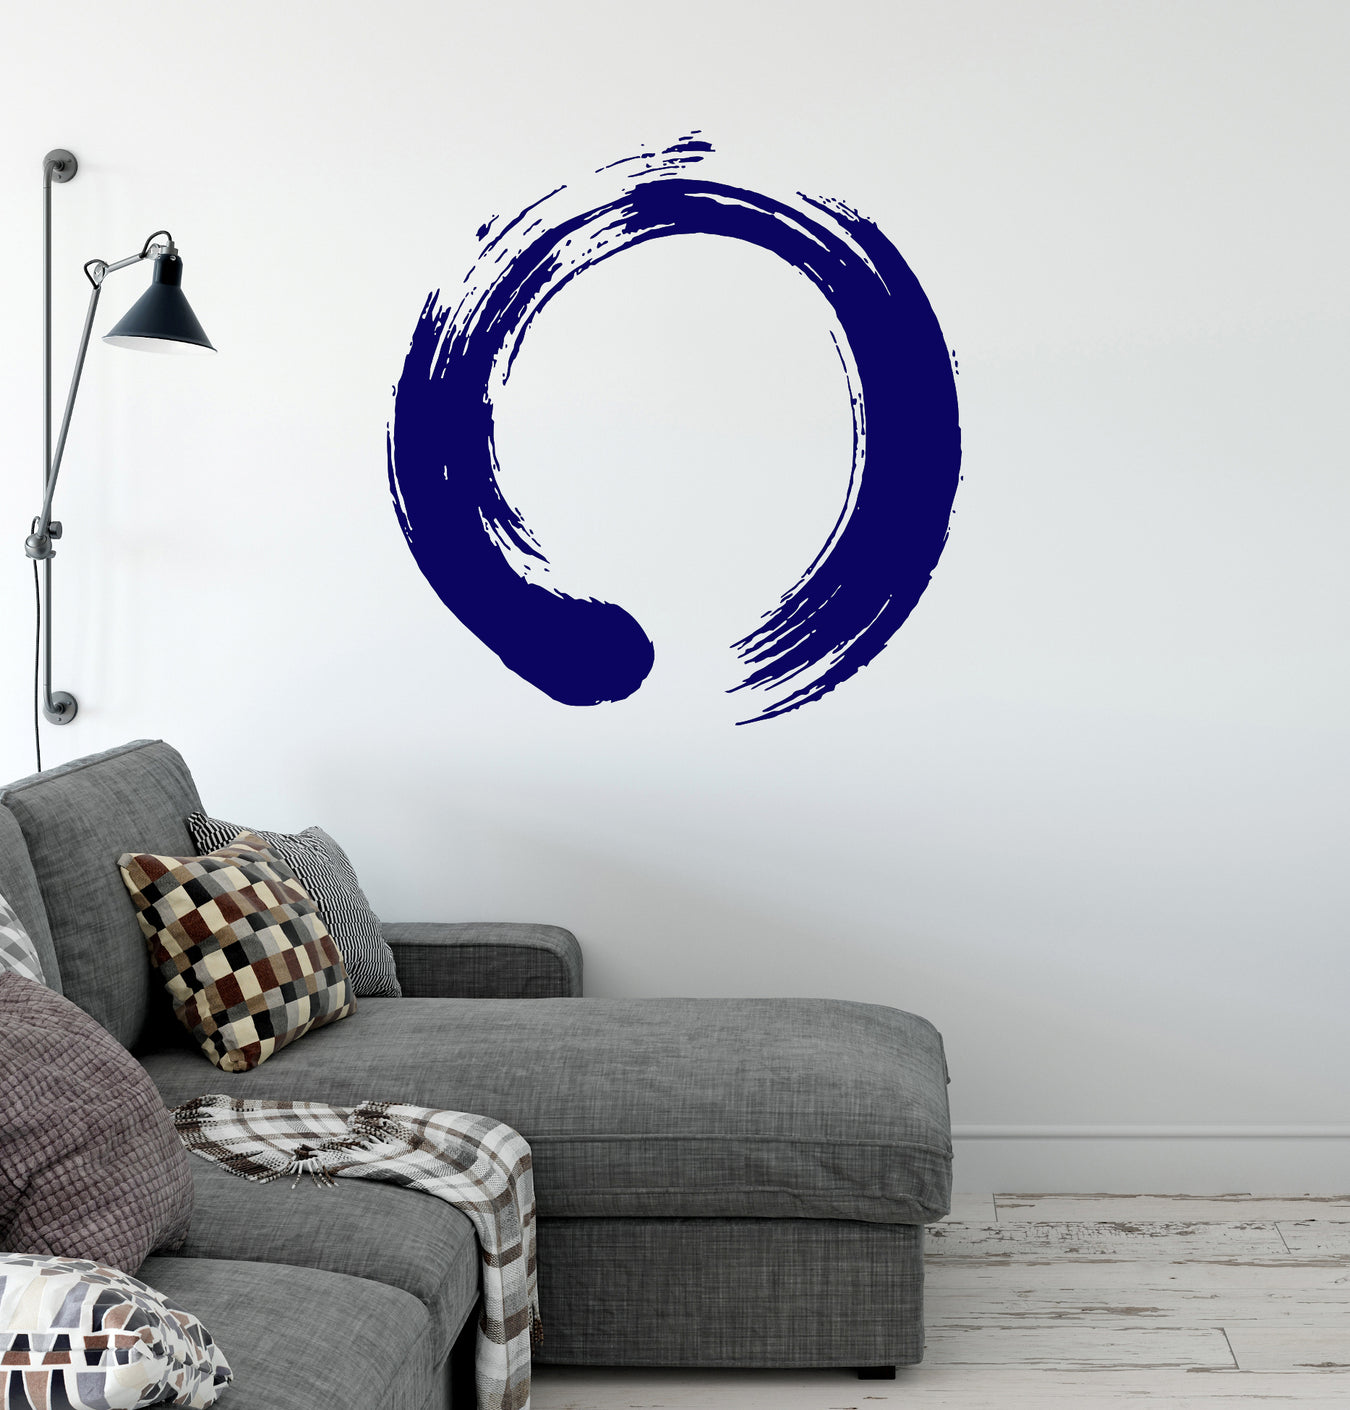 Enso Wall Vinyl Decals